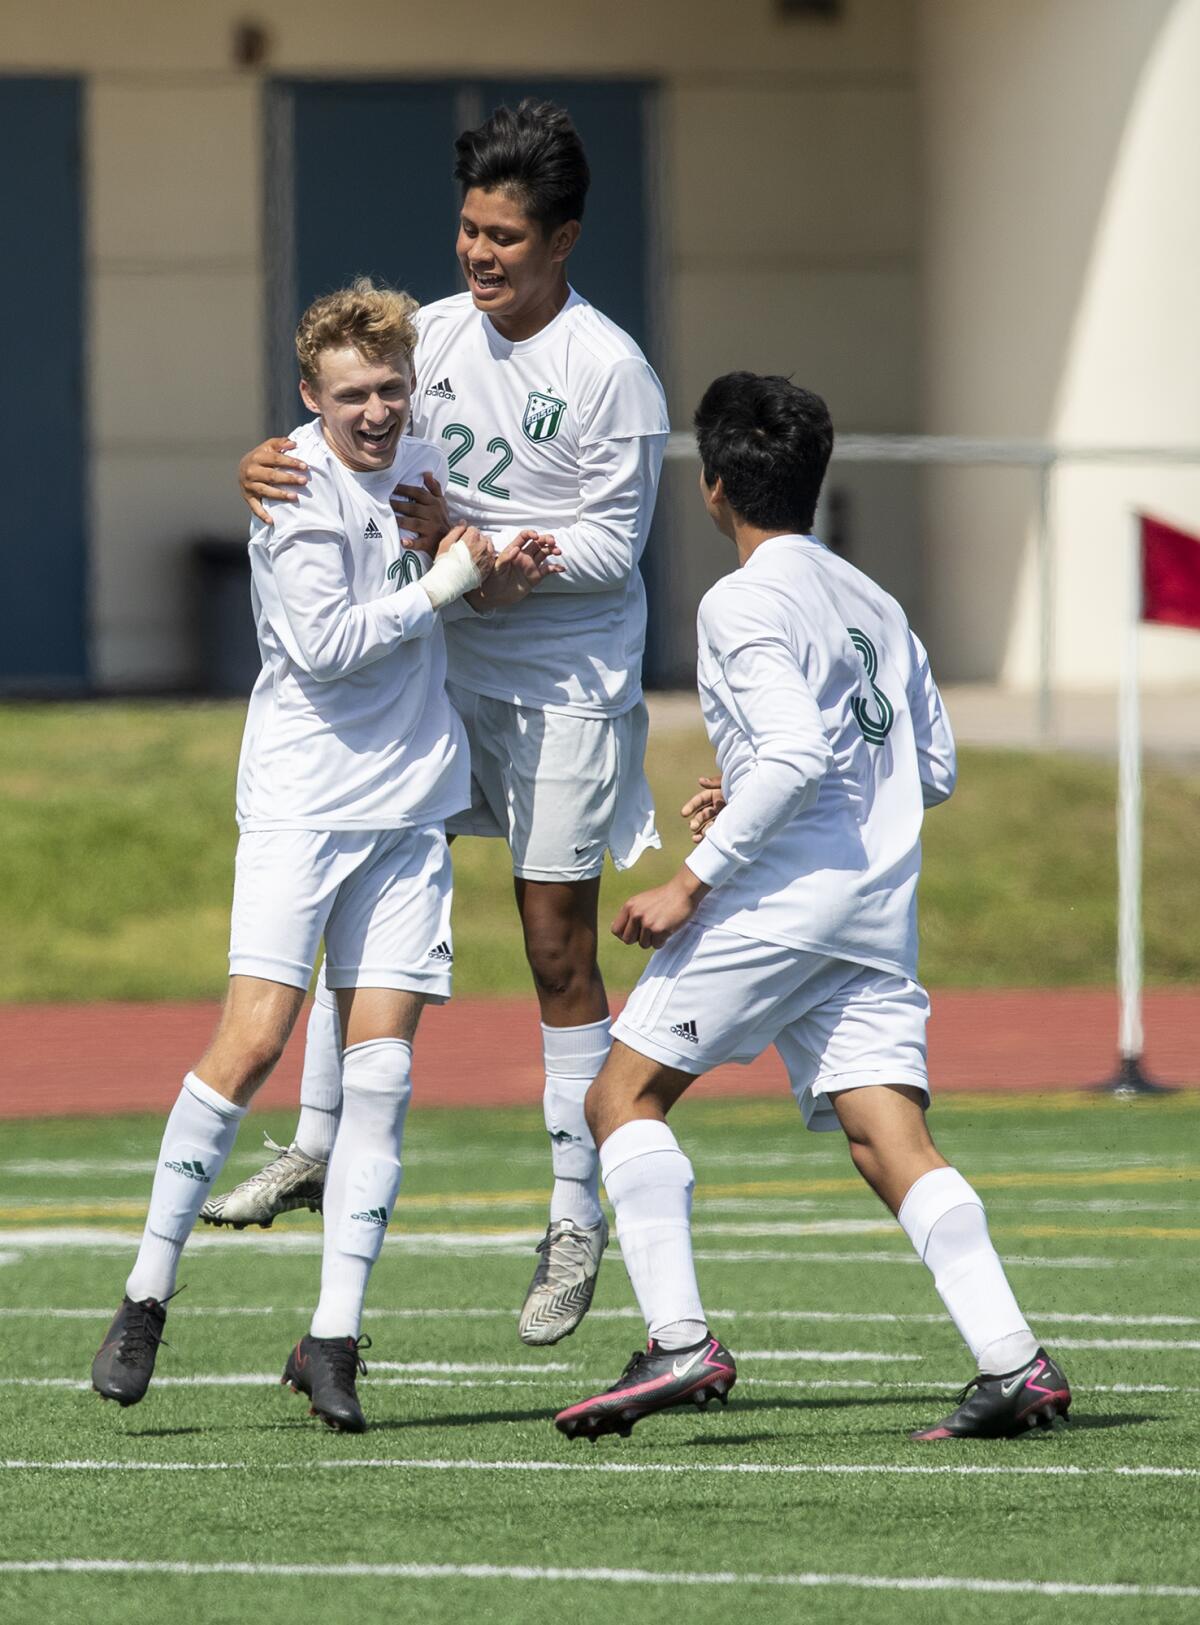 Edison's Kevin Blanco, right, and Ozzy Moran congratulate Trent Bellinger after he scored a goal against Fountain Valley.